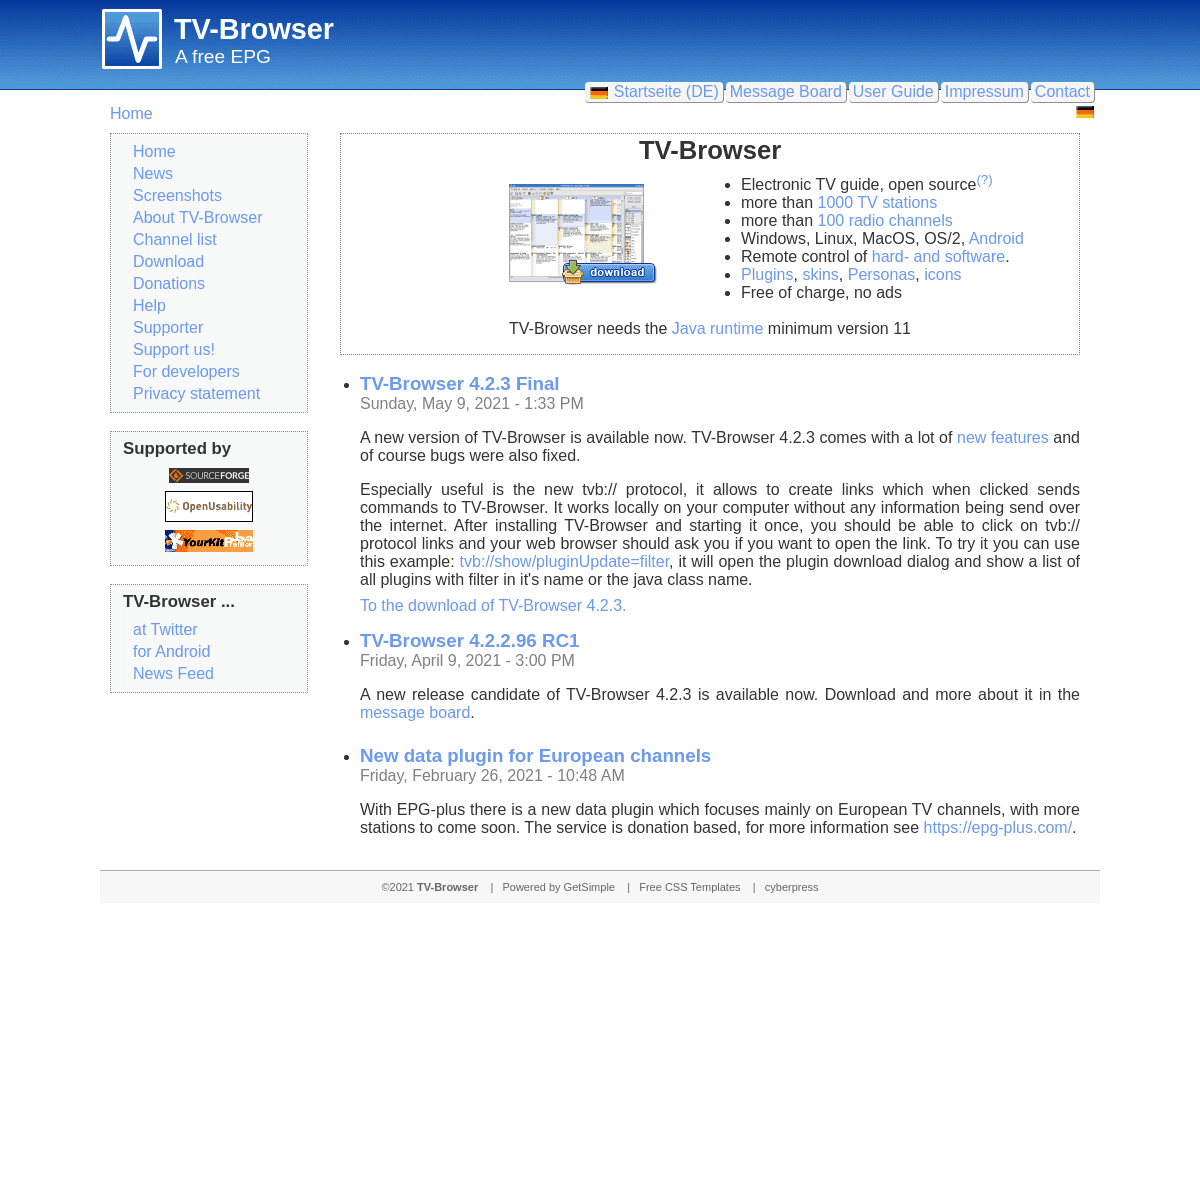 A complete backup of https://tvbrowser.org